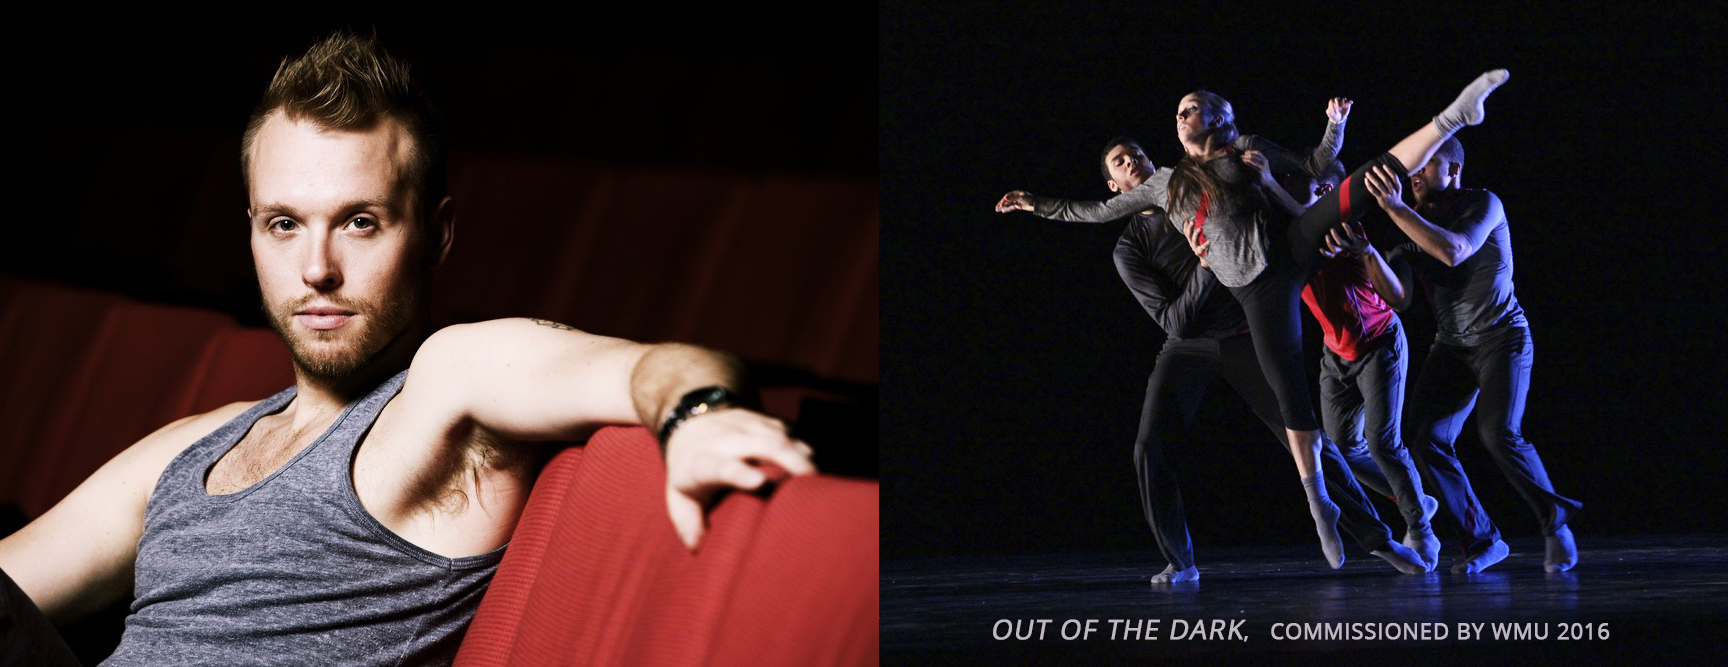 Left: James Gregg; Right: Performance of Gregg's Out of the Dark